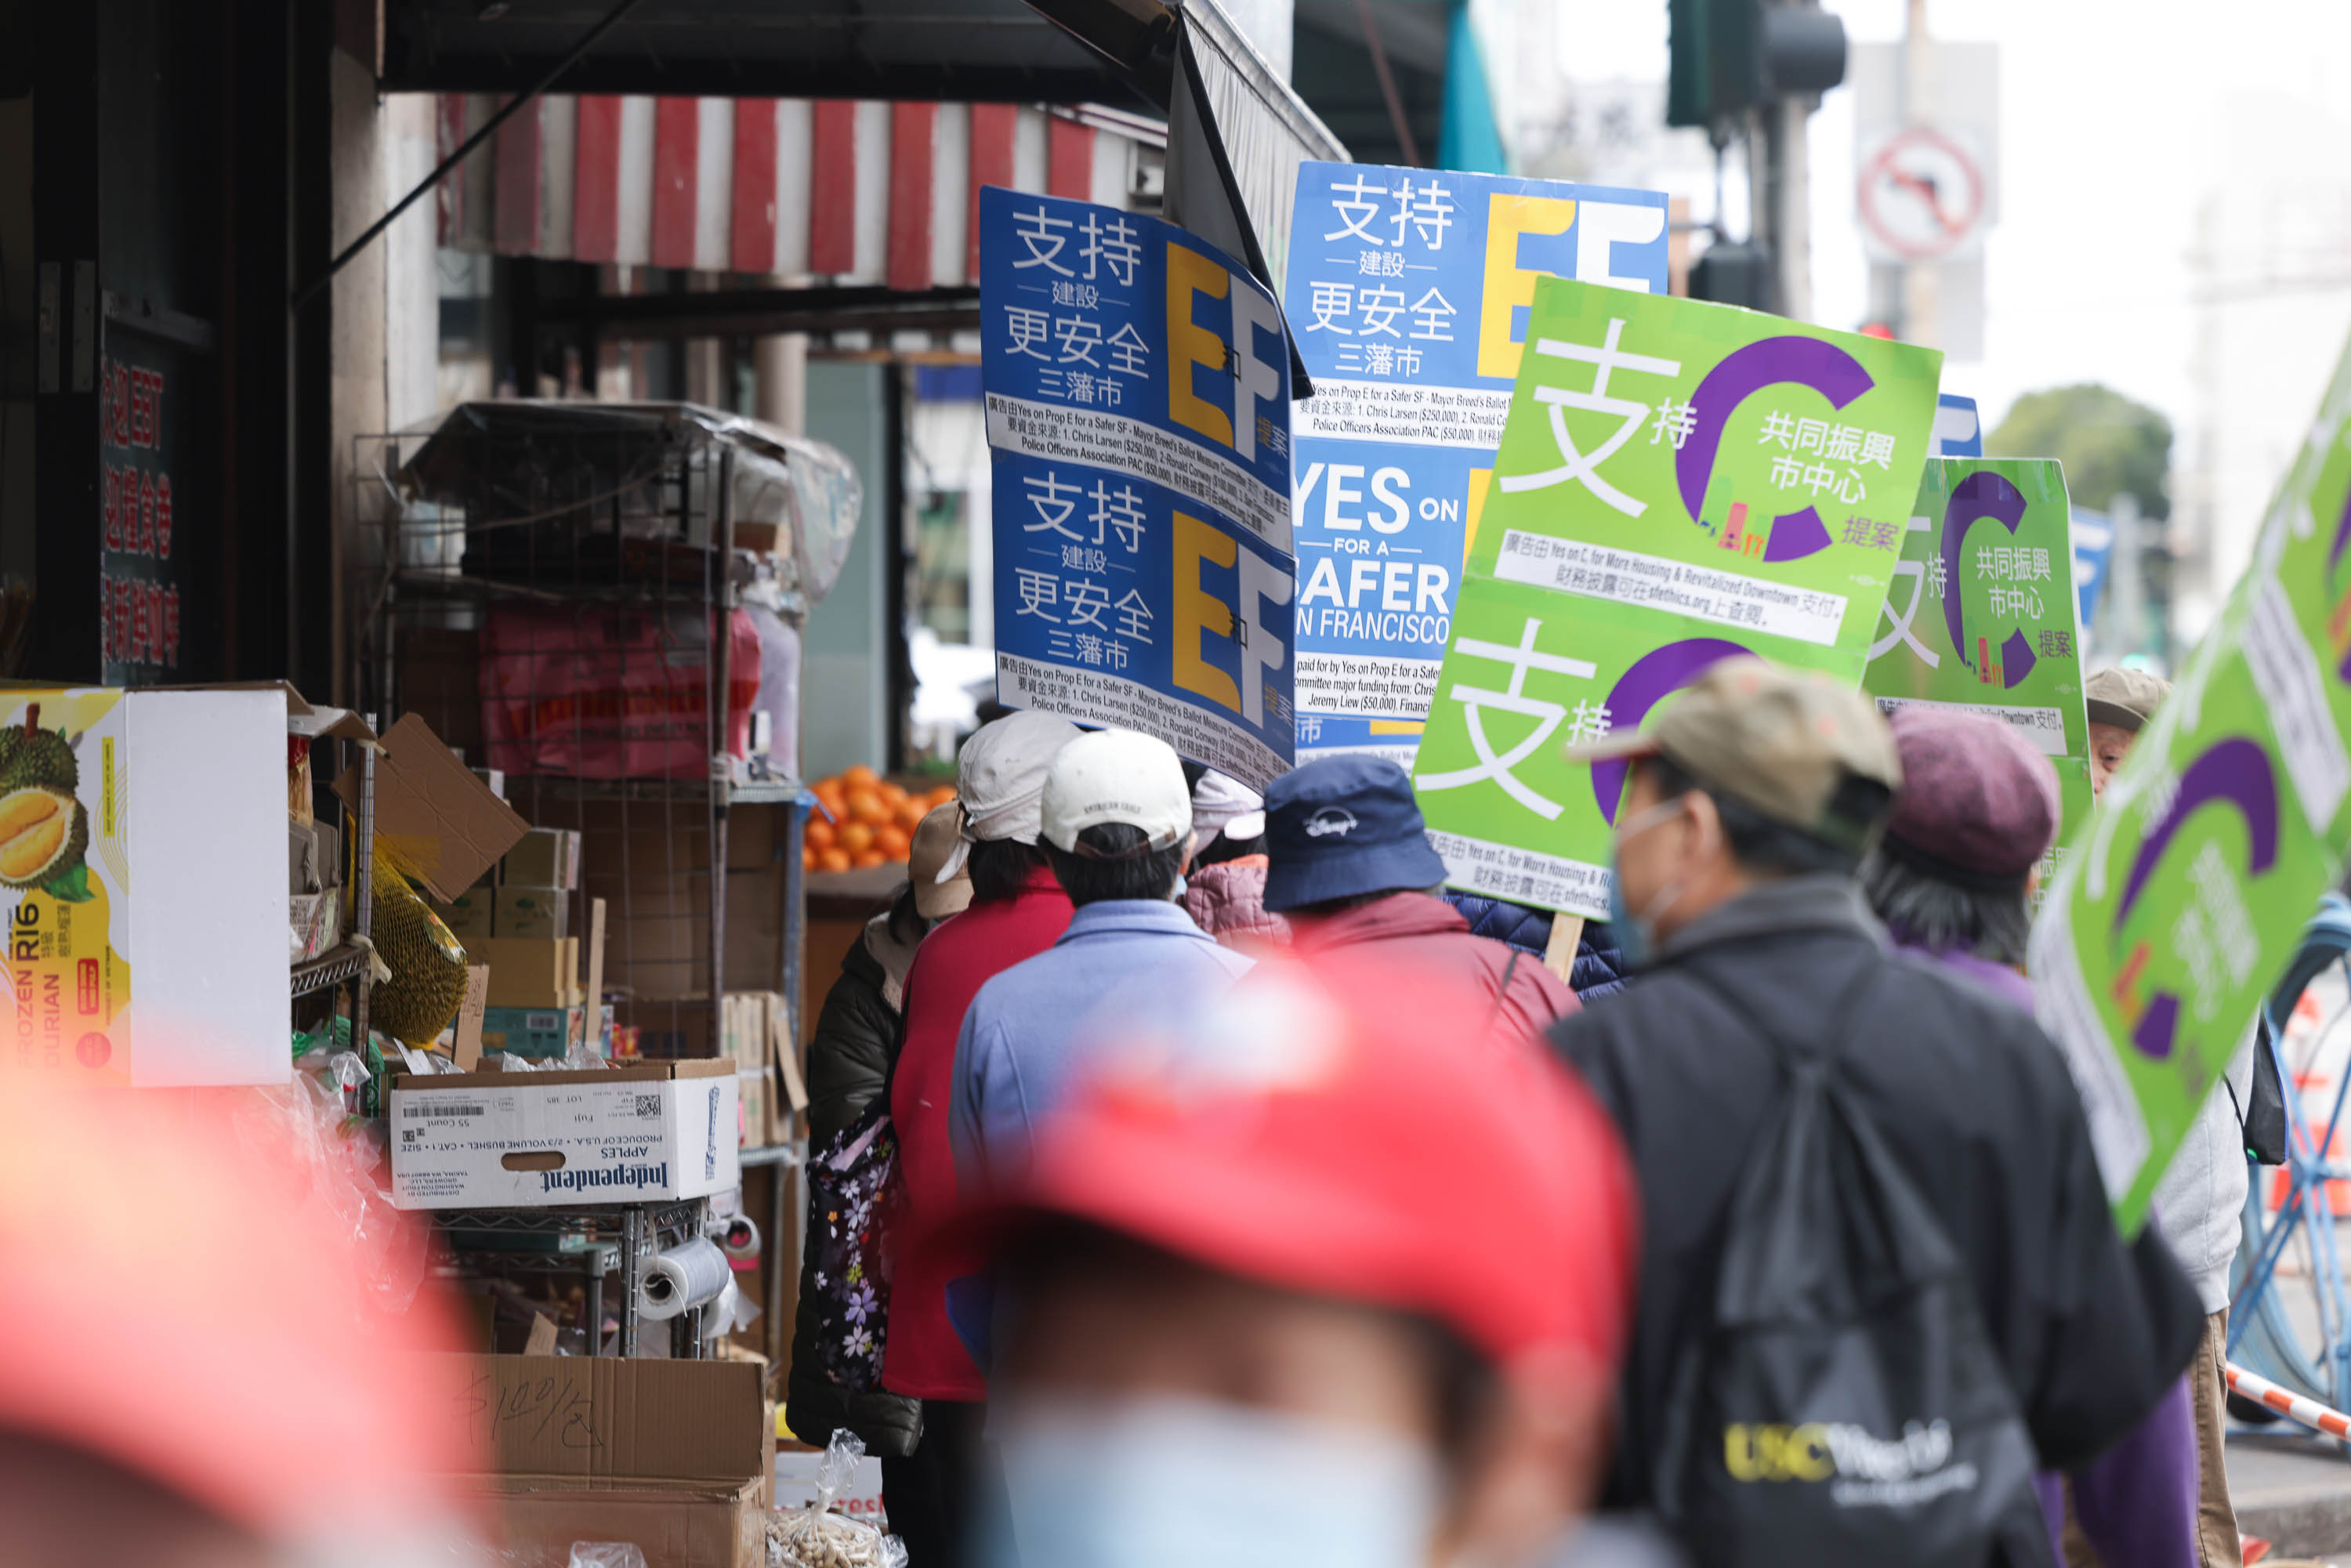 A bustling street scene in San Fran Francisco's Chinatown with people holding colorful protest signs with various text, including: &quot;YES ON E FOR A SAFER SAN FRANCISCO.&quot;